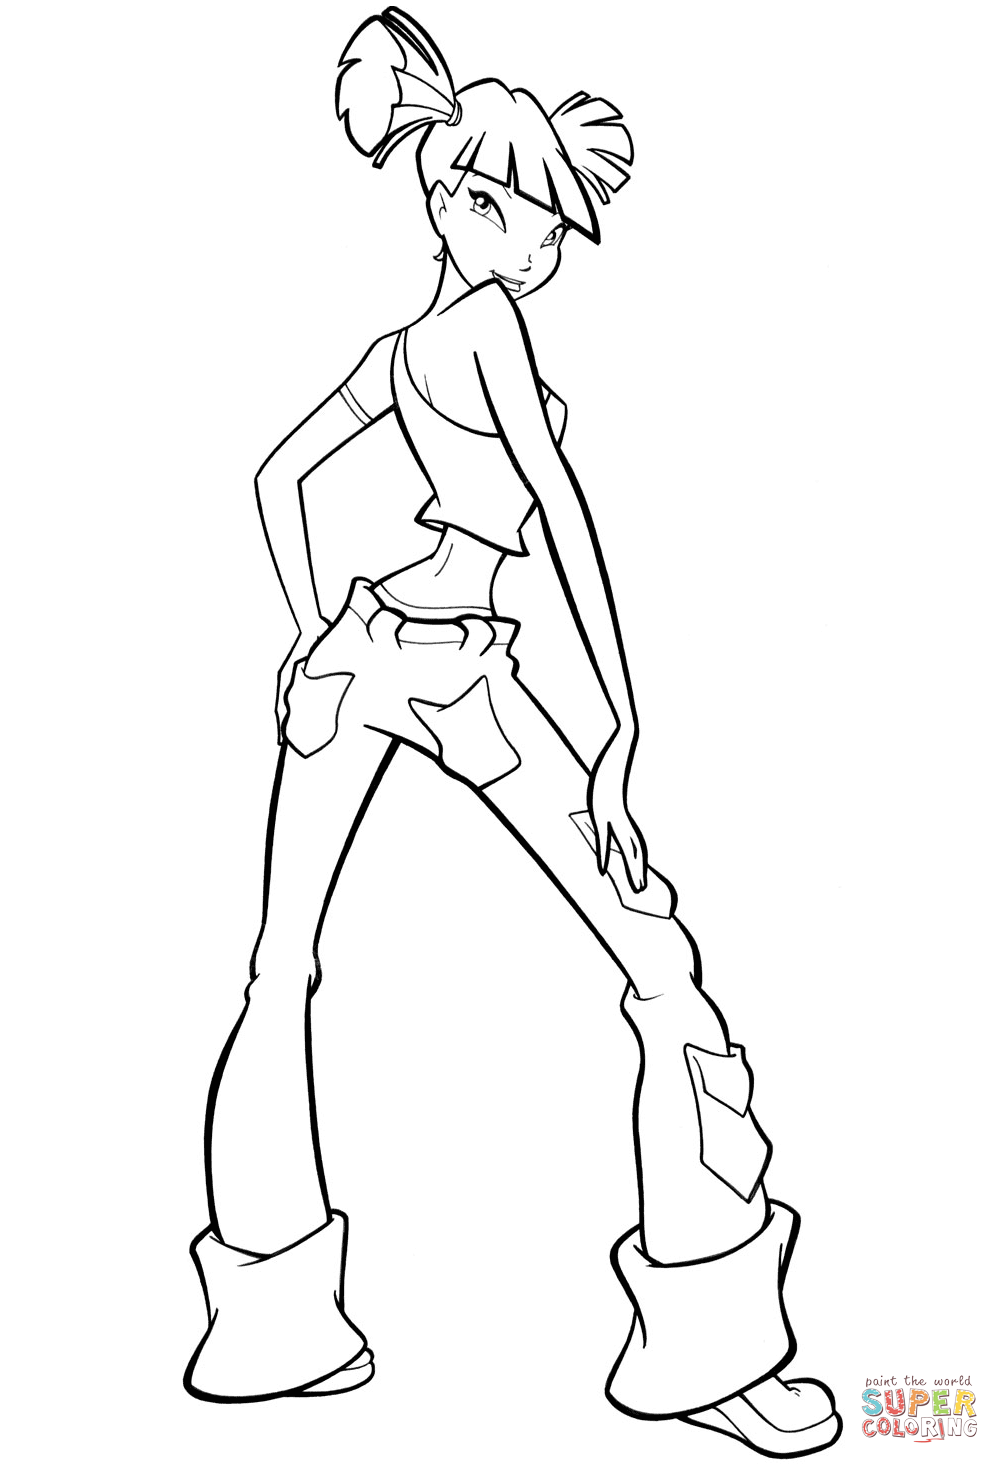 Musa In Nice Pants coloring page | Free Printable Coloring Pages